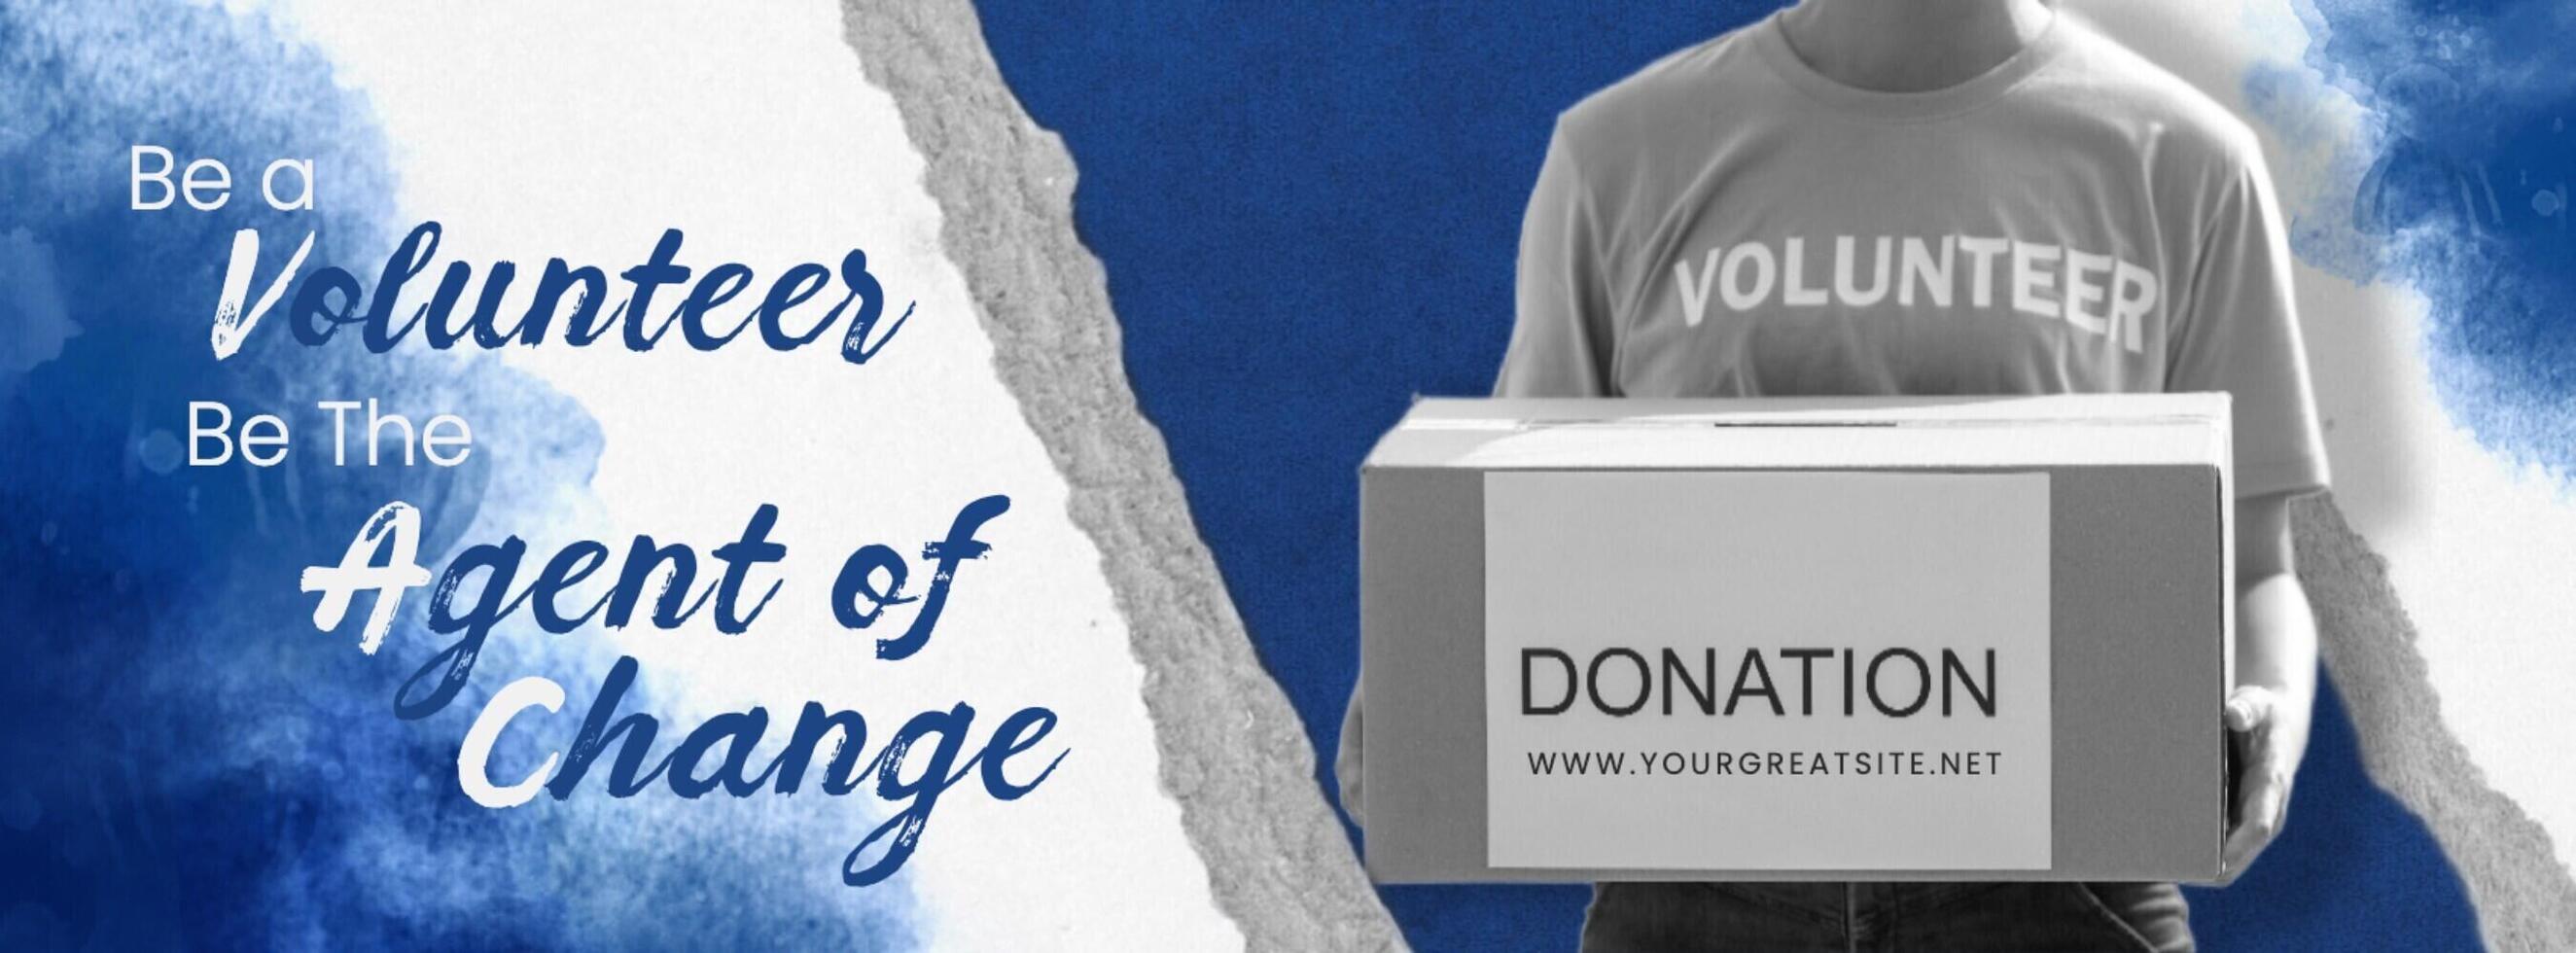 Be a Volunteer Be The Agent of Change Template for Facebook Cover